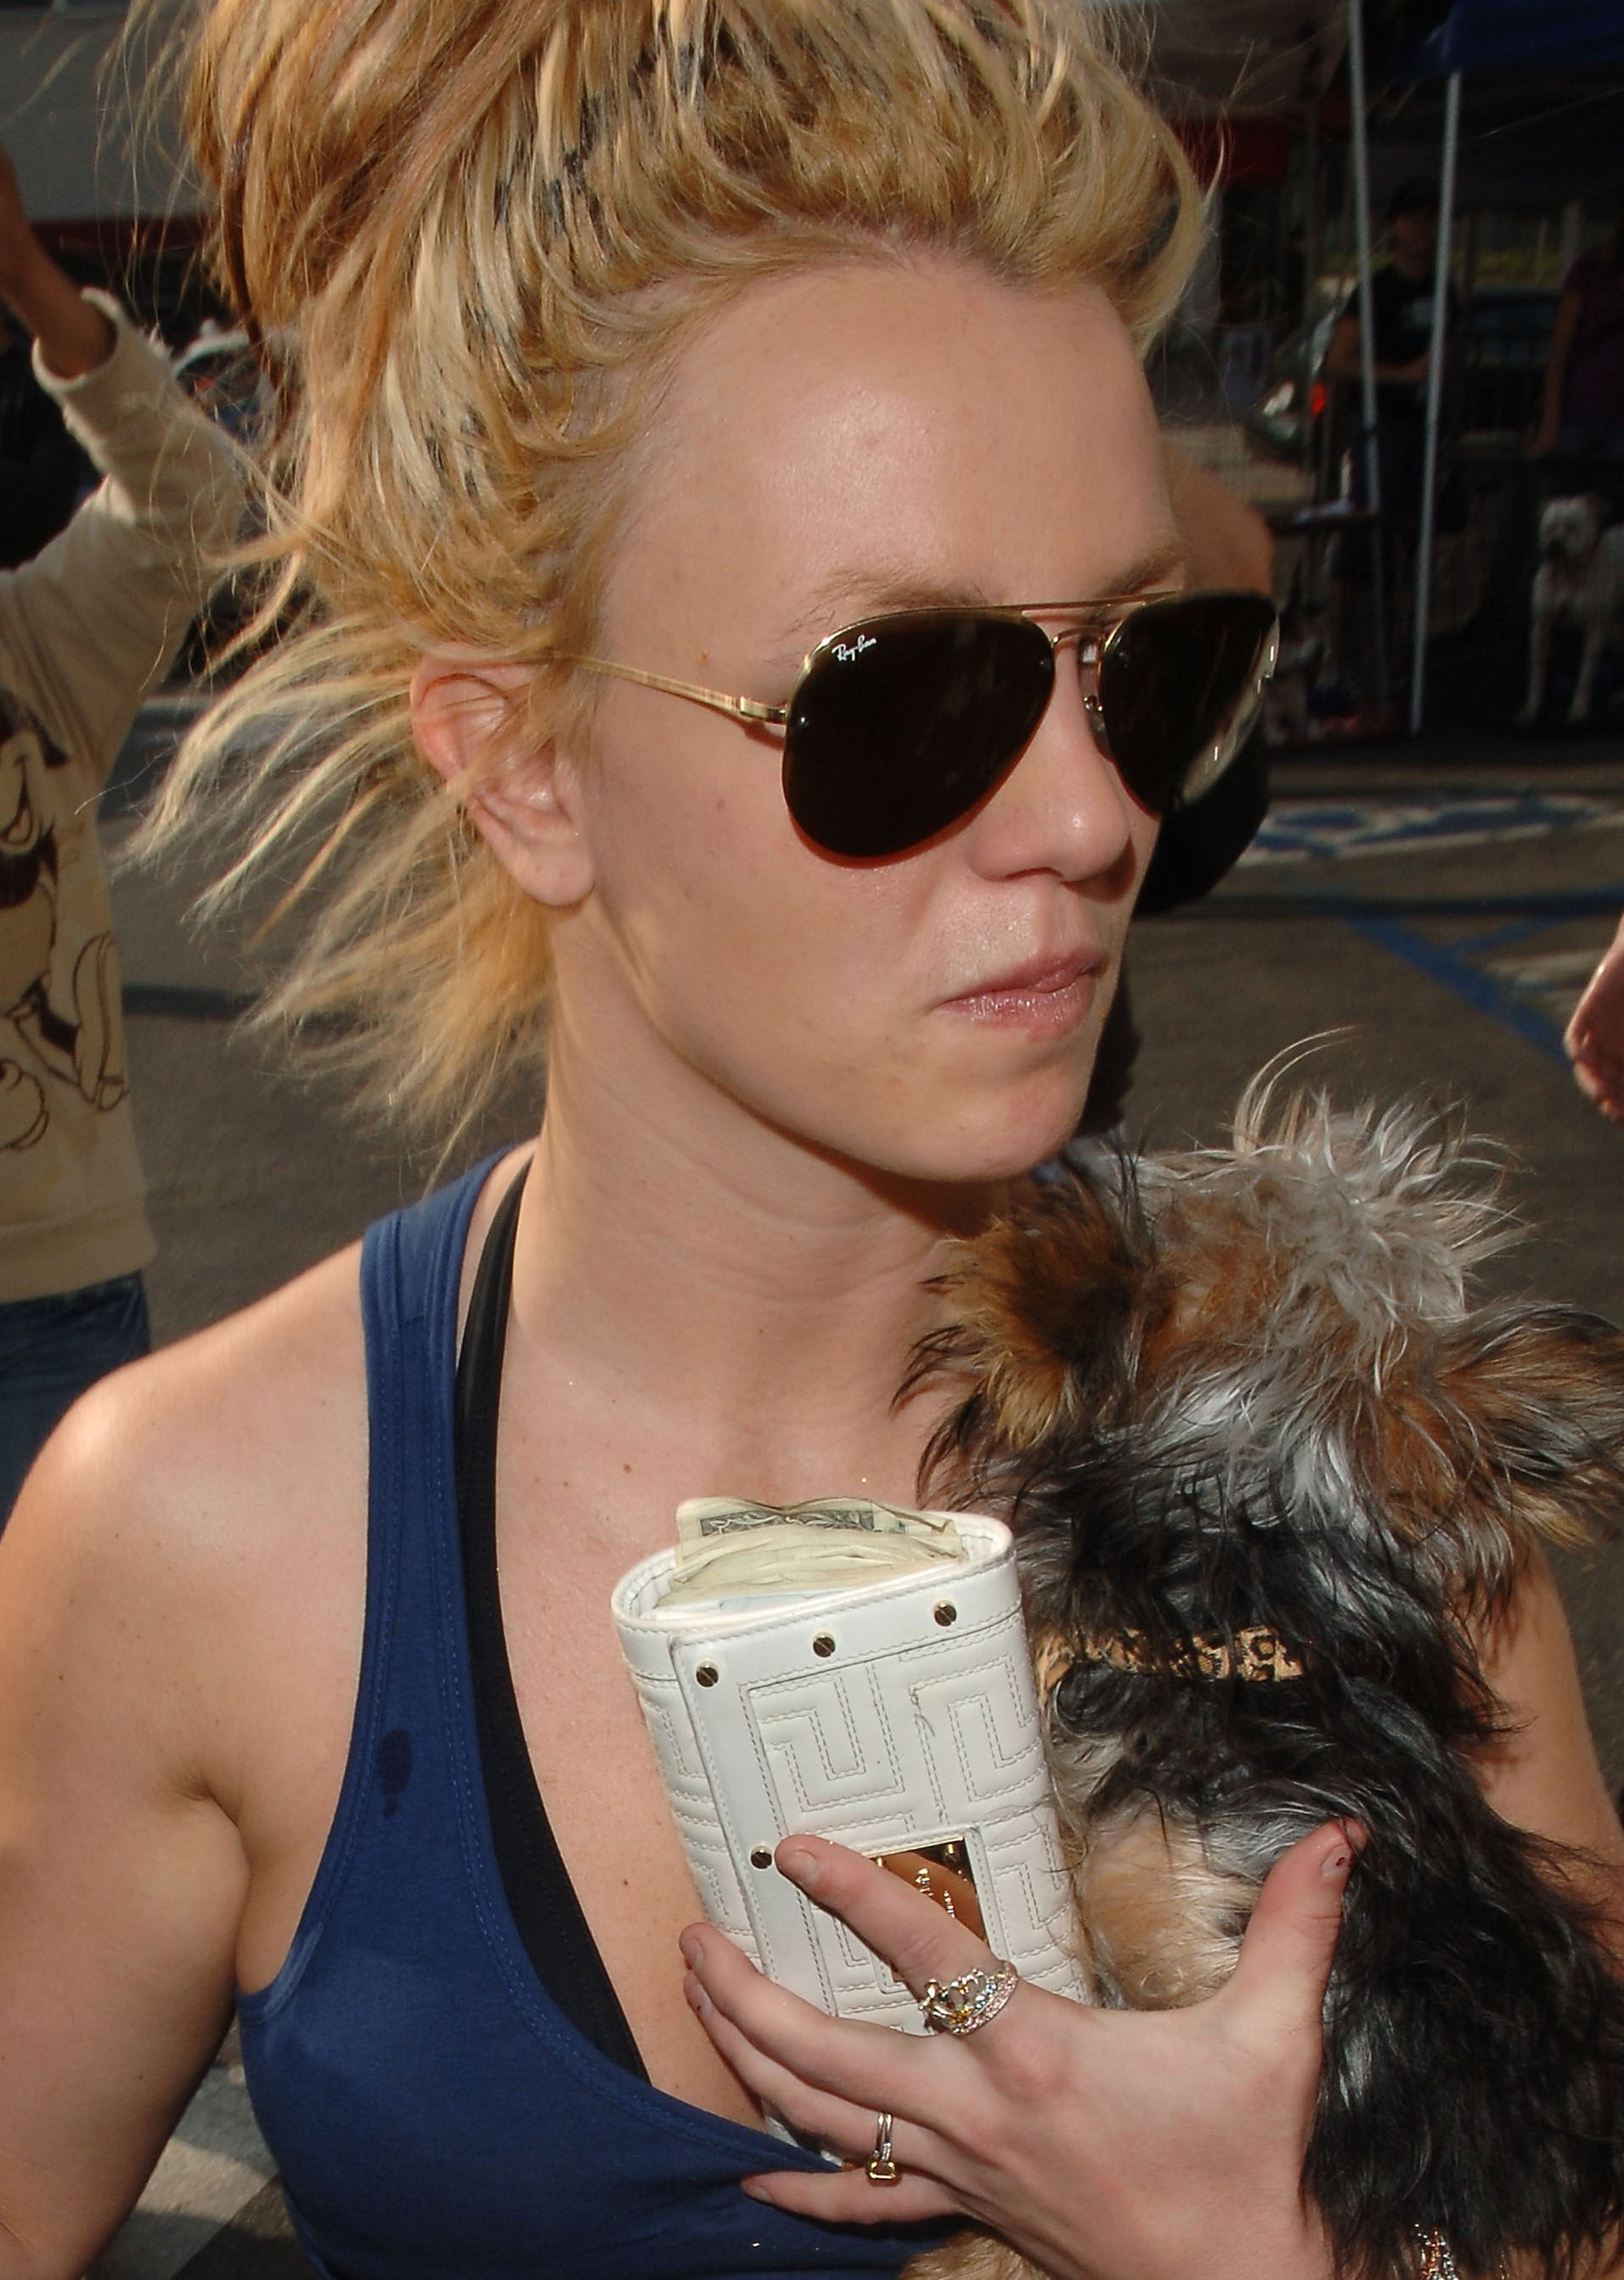 Close-up of Britney wearing sunglasses, a halter top, and her hair up